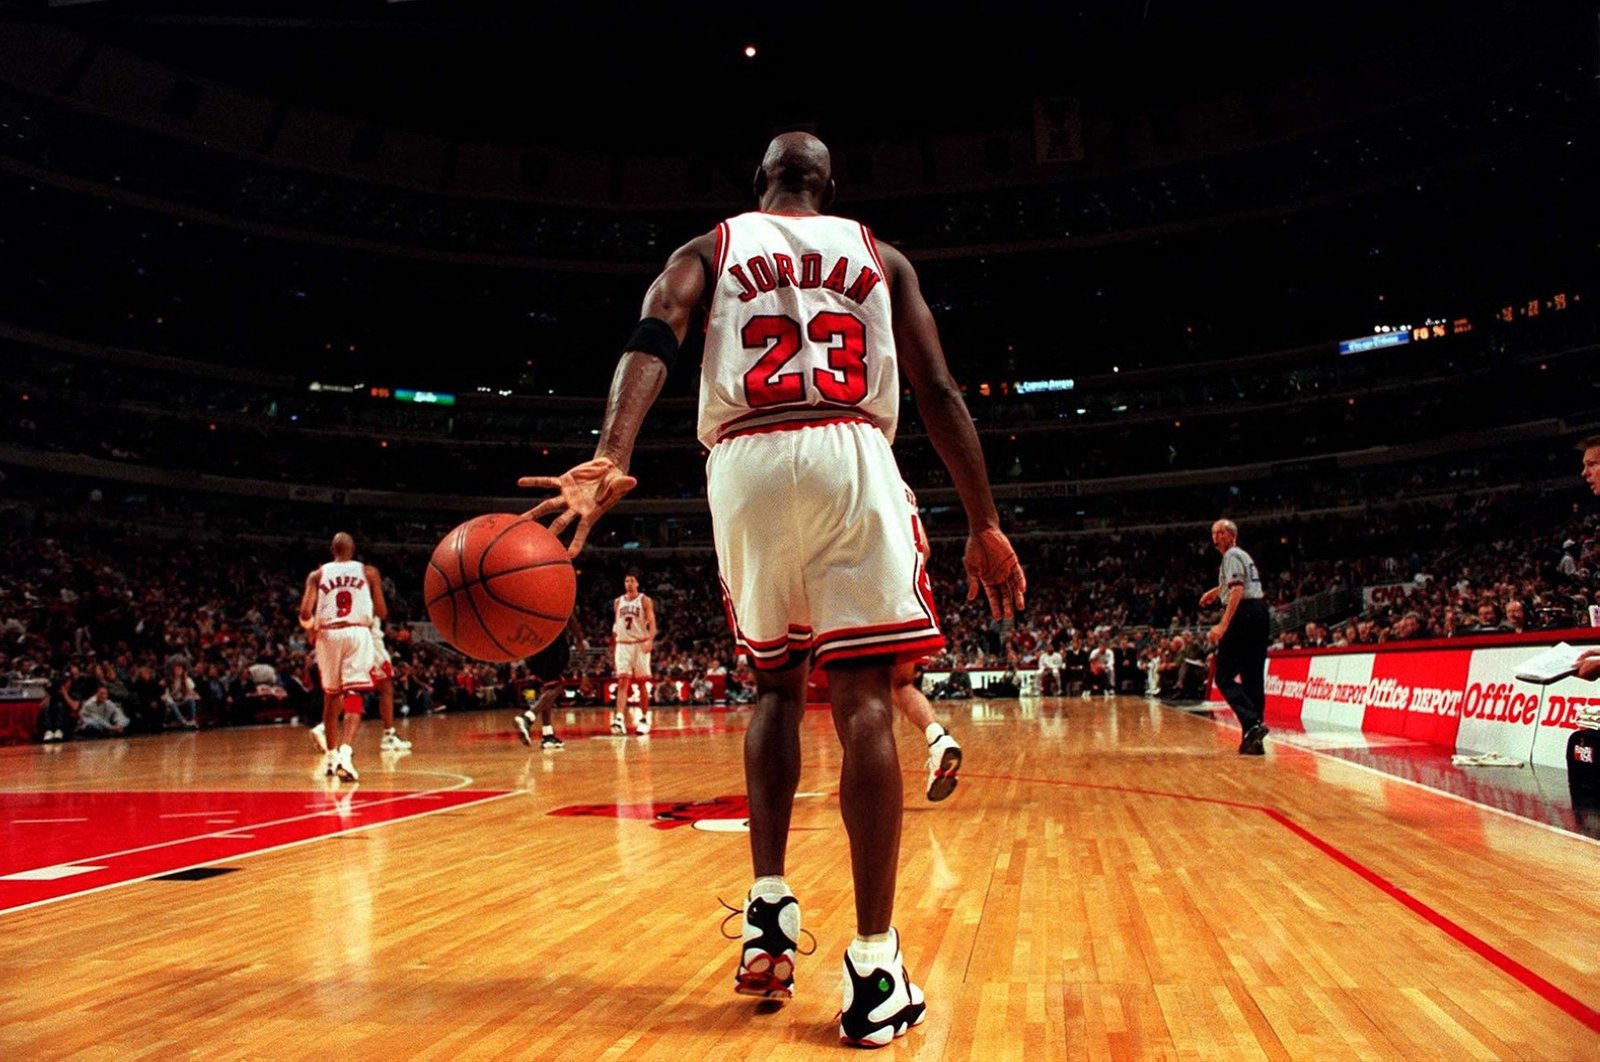 NBA icon Michael Jordan's game-worn college jersey sold for $1.38m